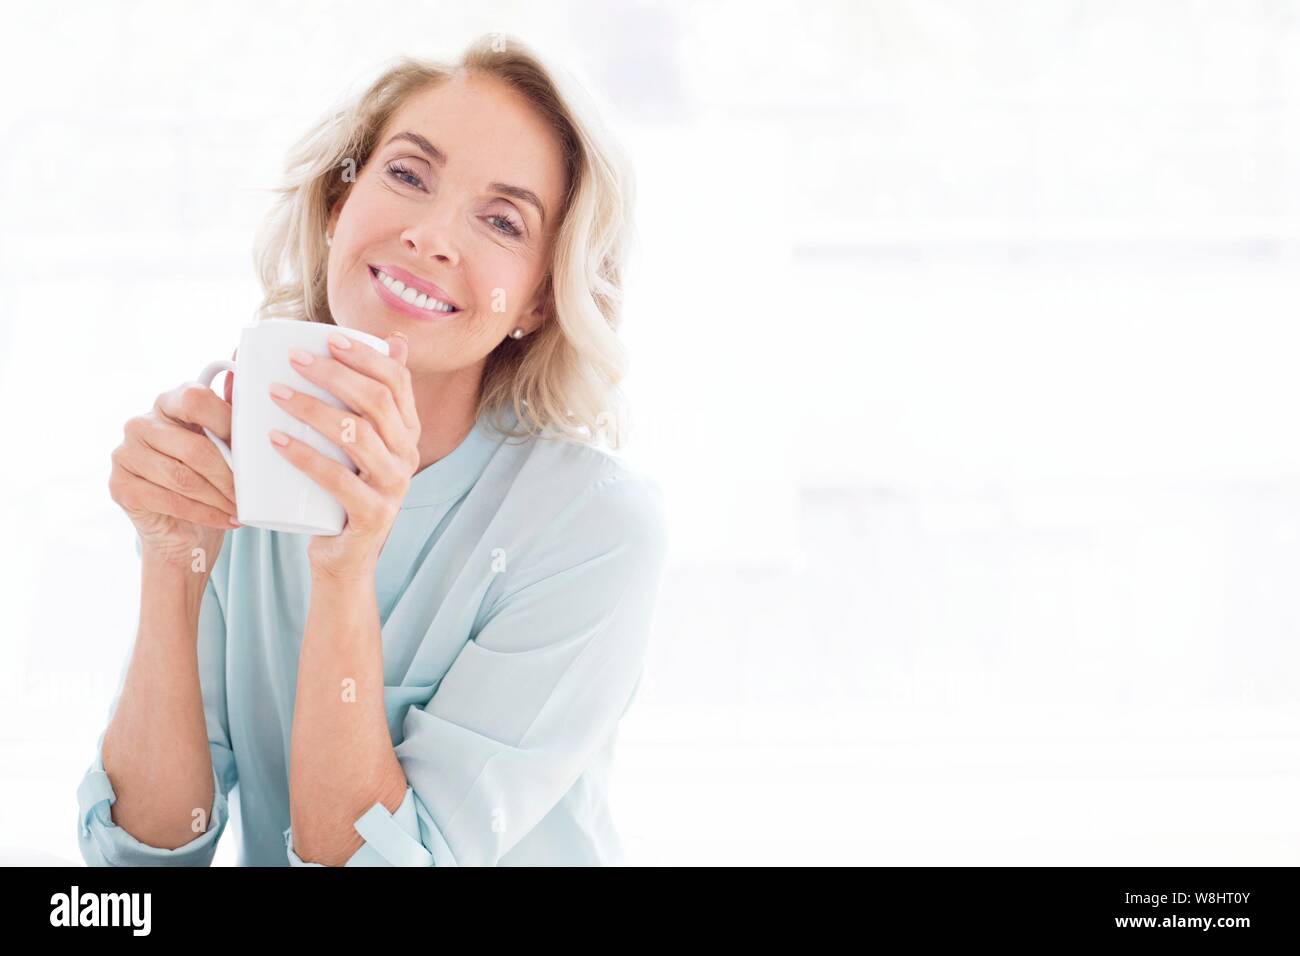 Mature woman smiling with cup of tea. Stock Photo